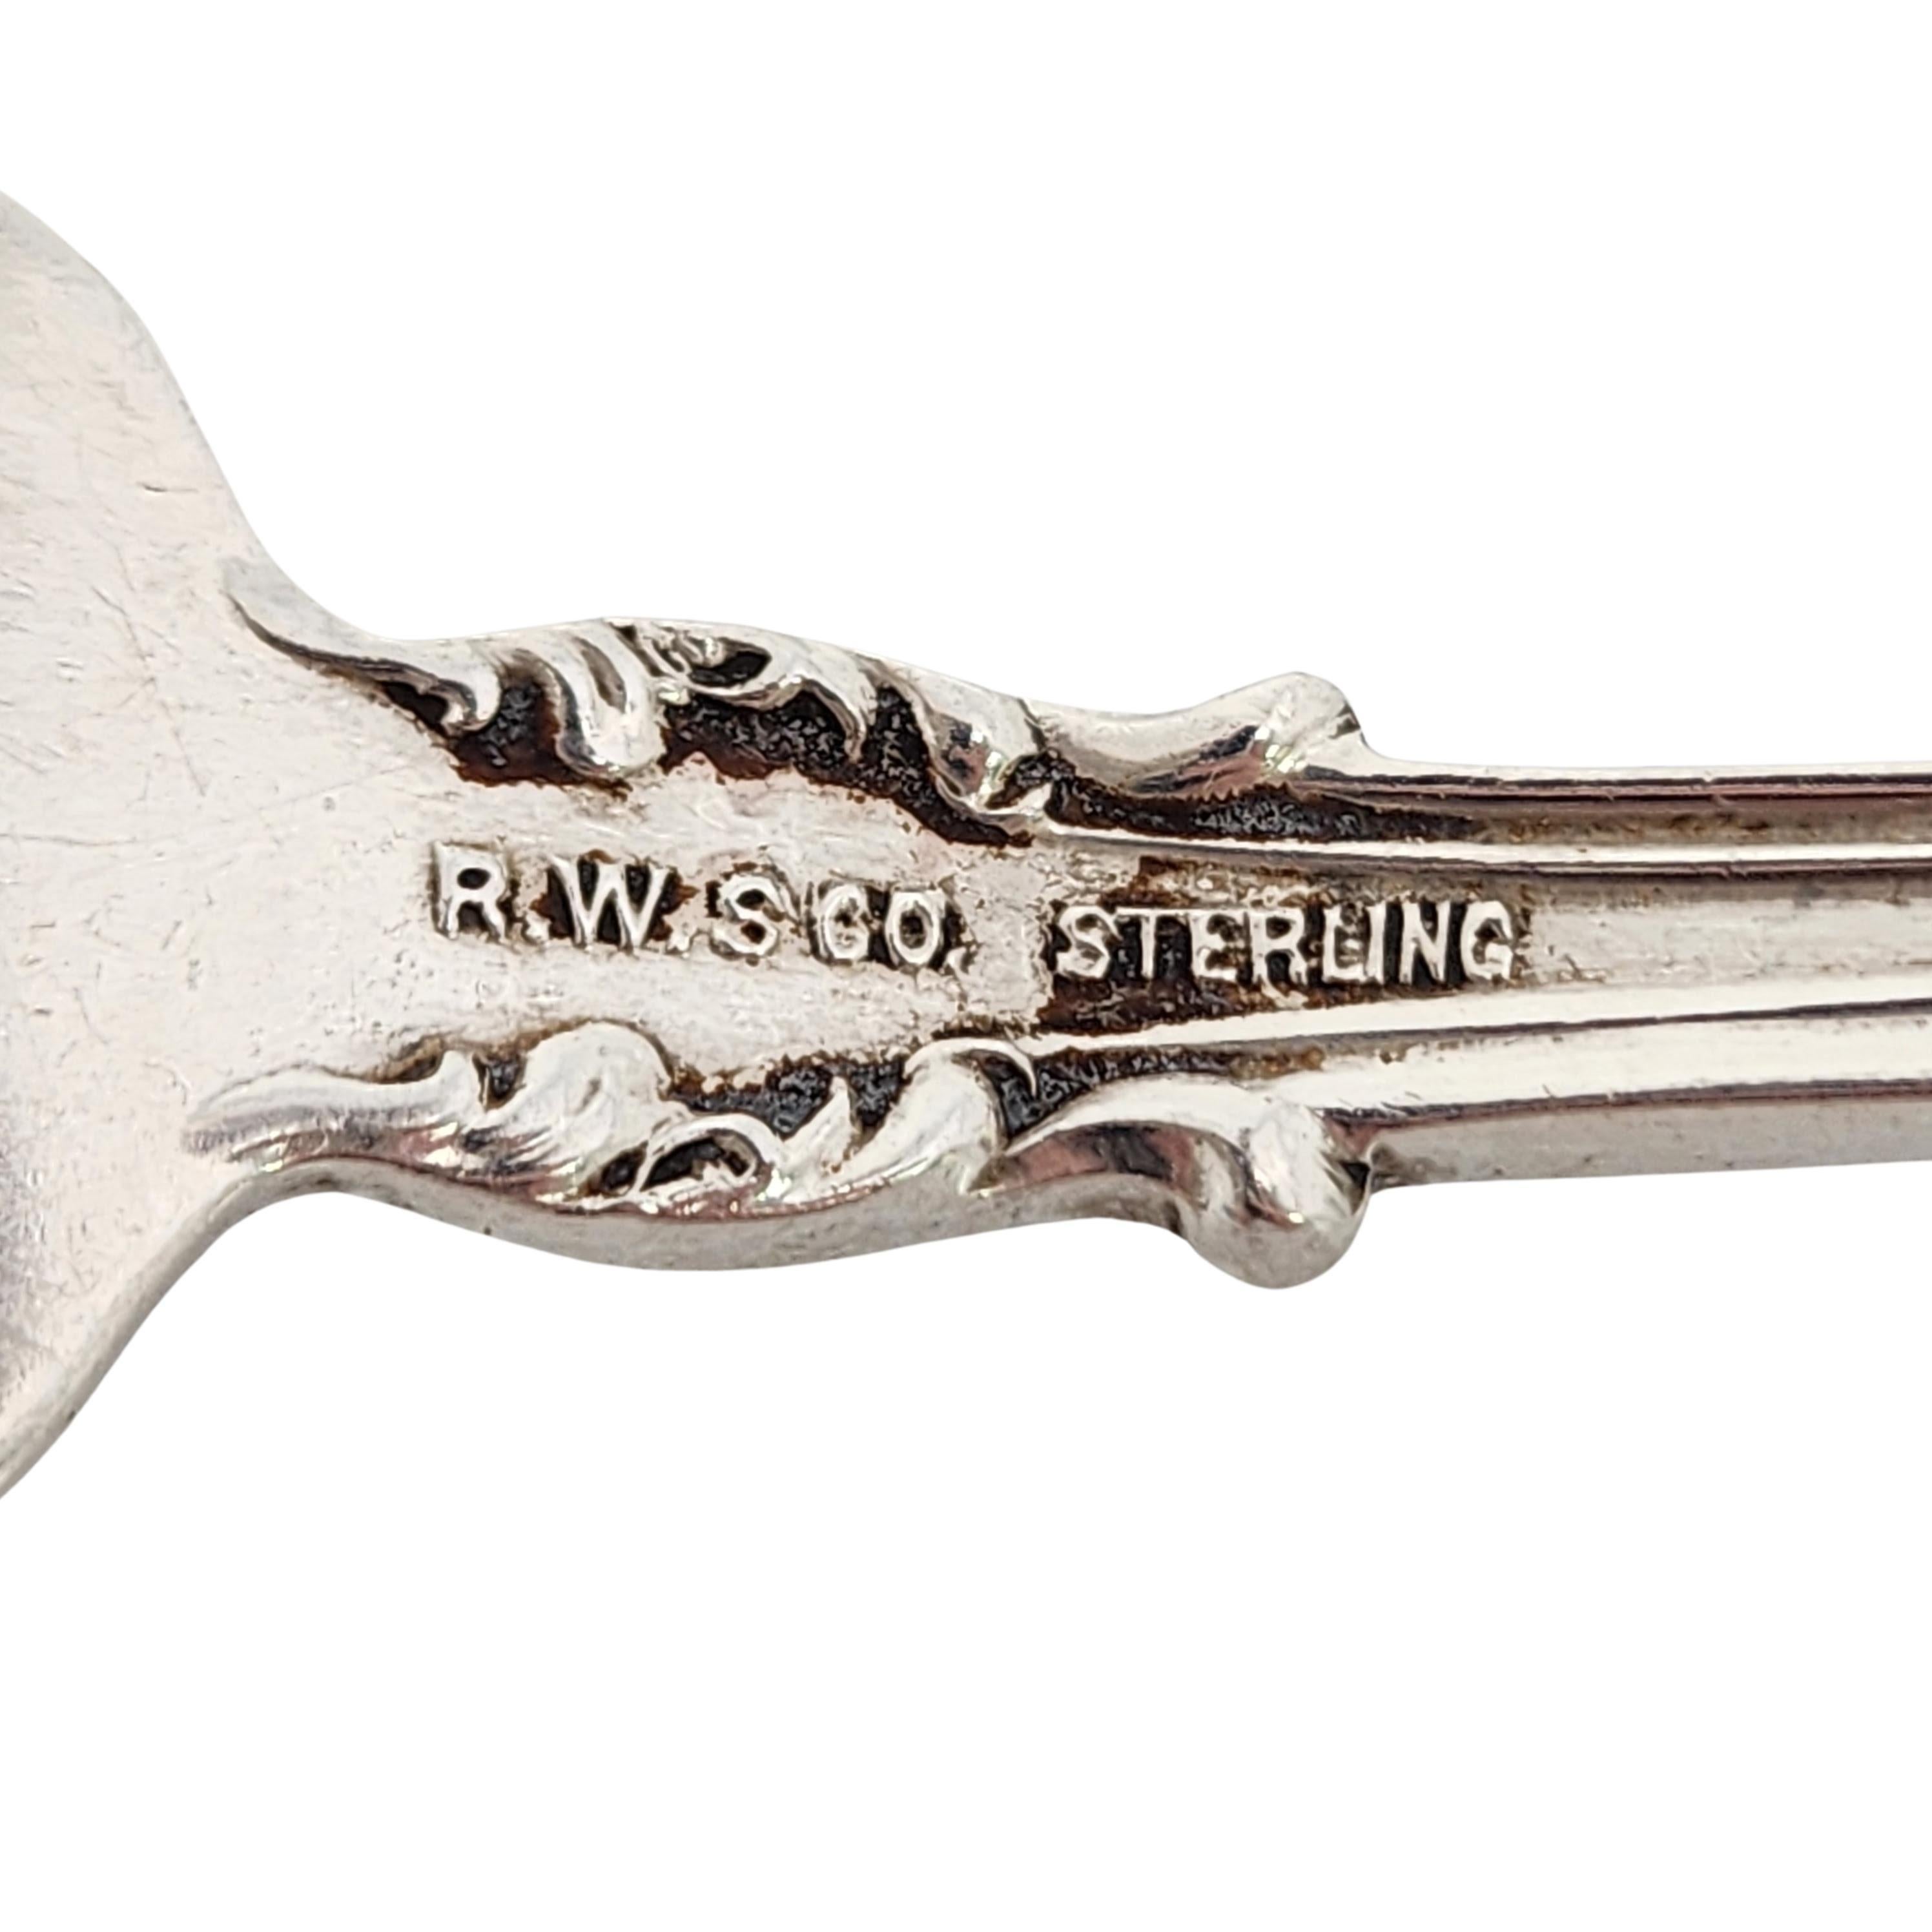 Roger Williams Silver Co Sterling Silver Corinthian Salad Fork w/Monogram #15838 For Sale 4